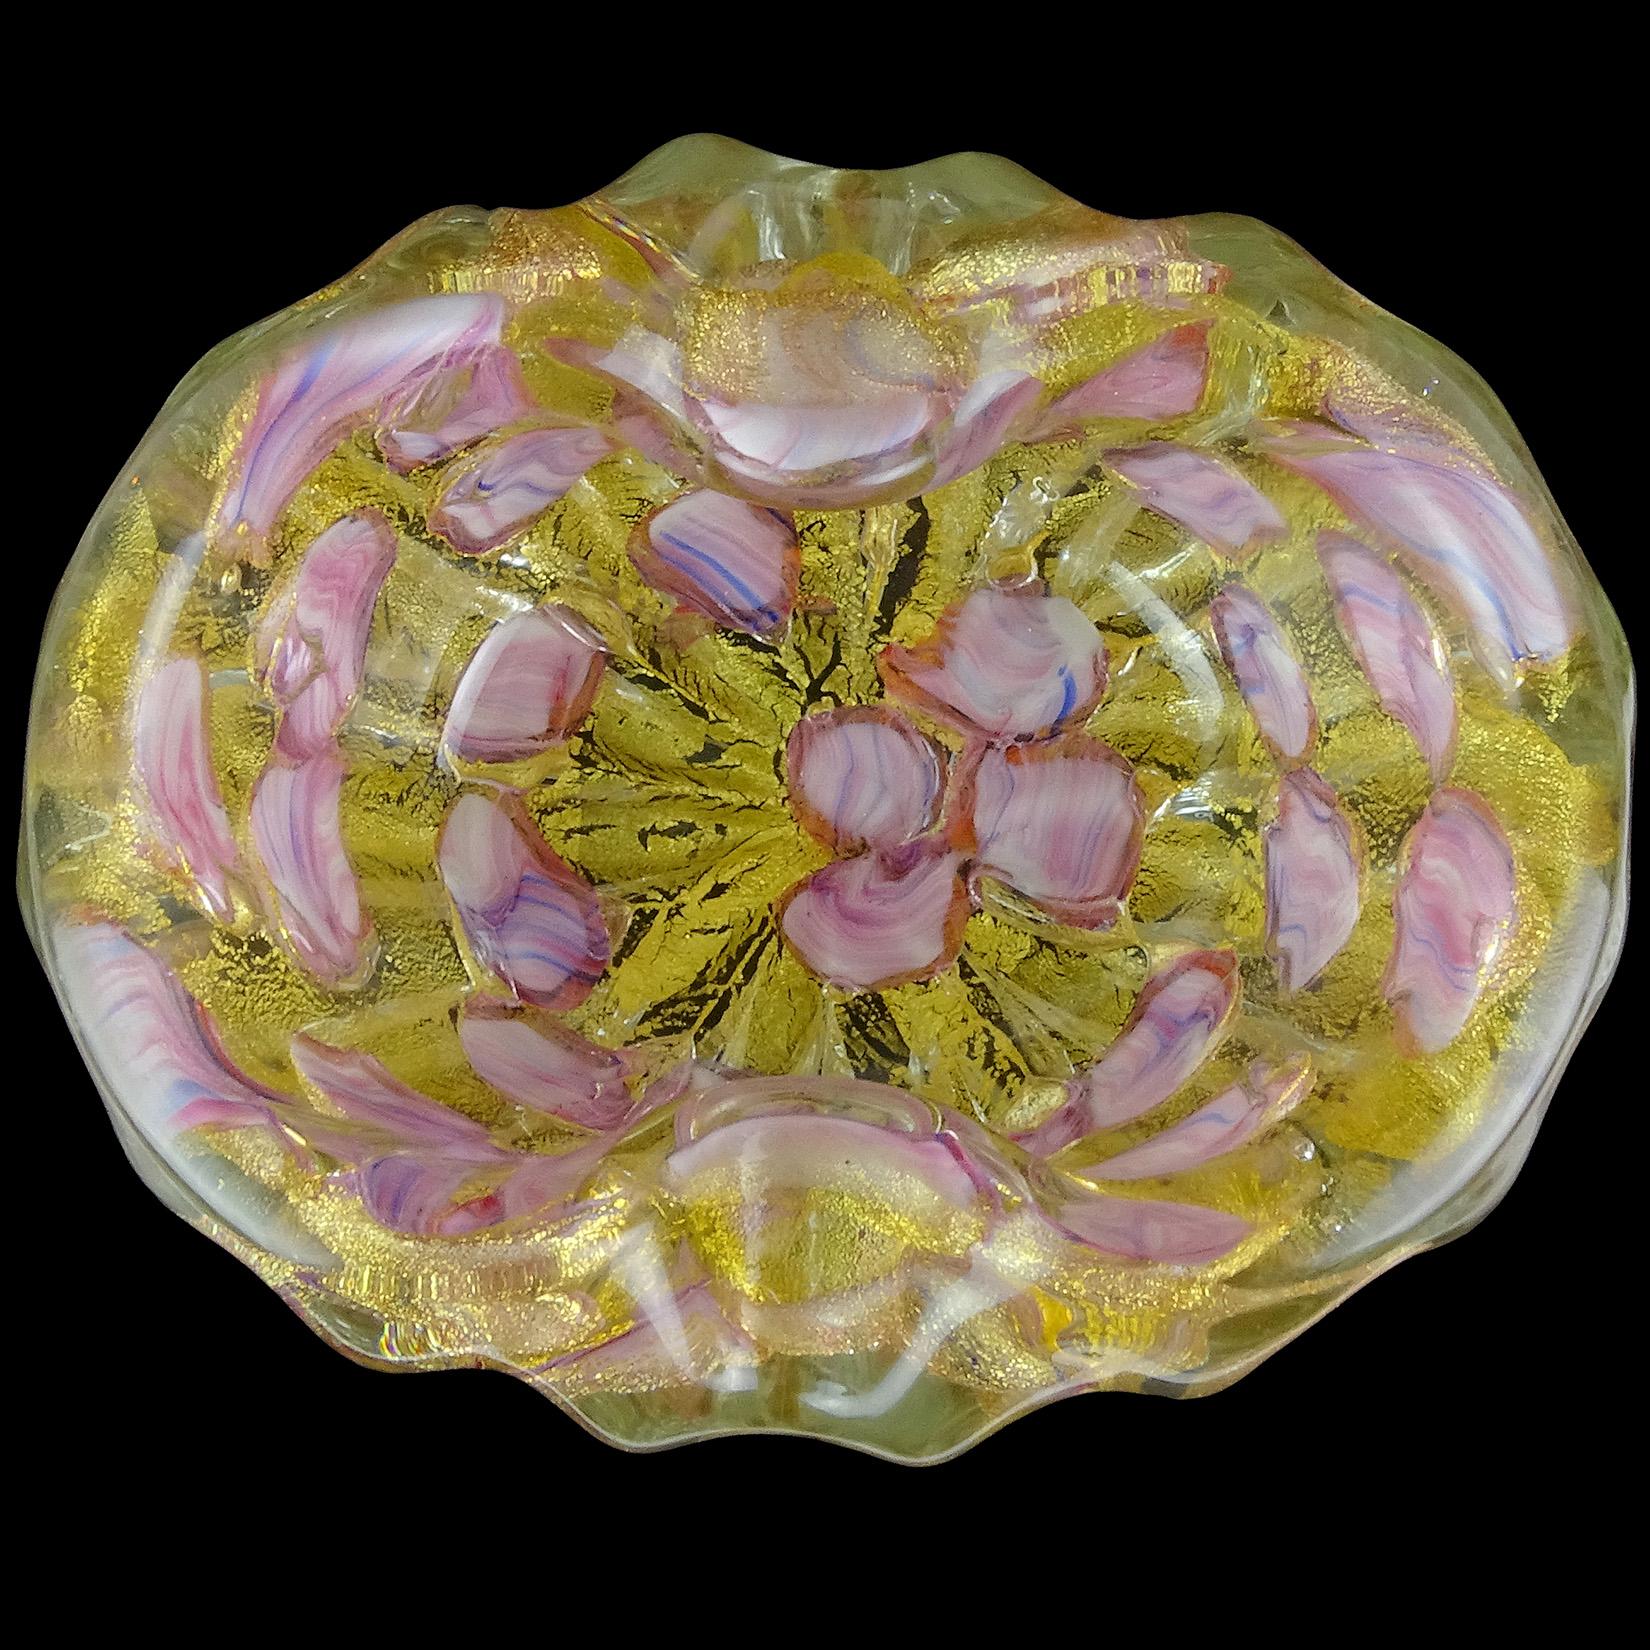 Beautiful Murano hand blown gold flecks, with pink and blue swirled spots Italian art glass bowl or ashtray. Documented to the Barovier e Toso Company. Created with very thick and heavy glass. Measures: 6 1/4” x 5 1/4